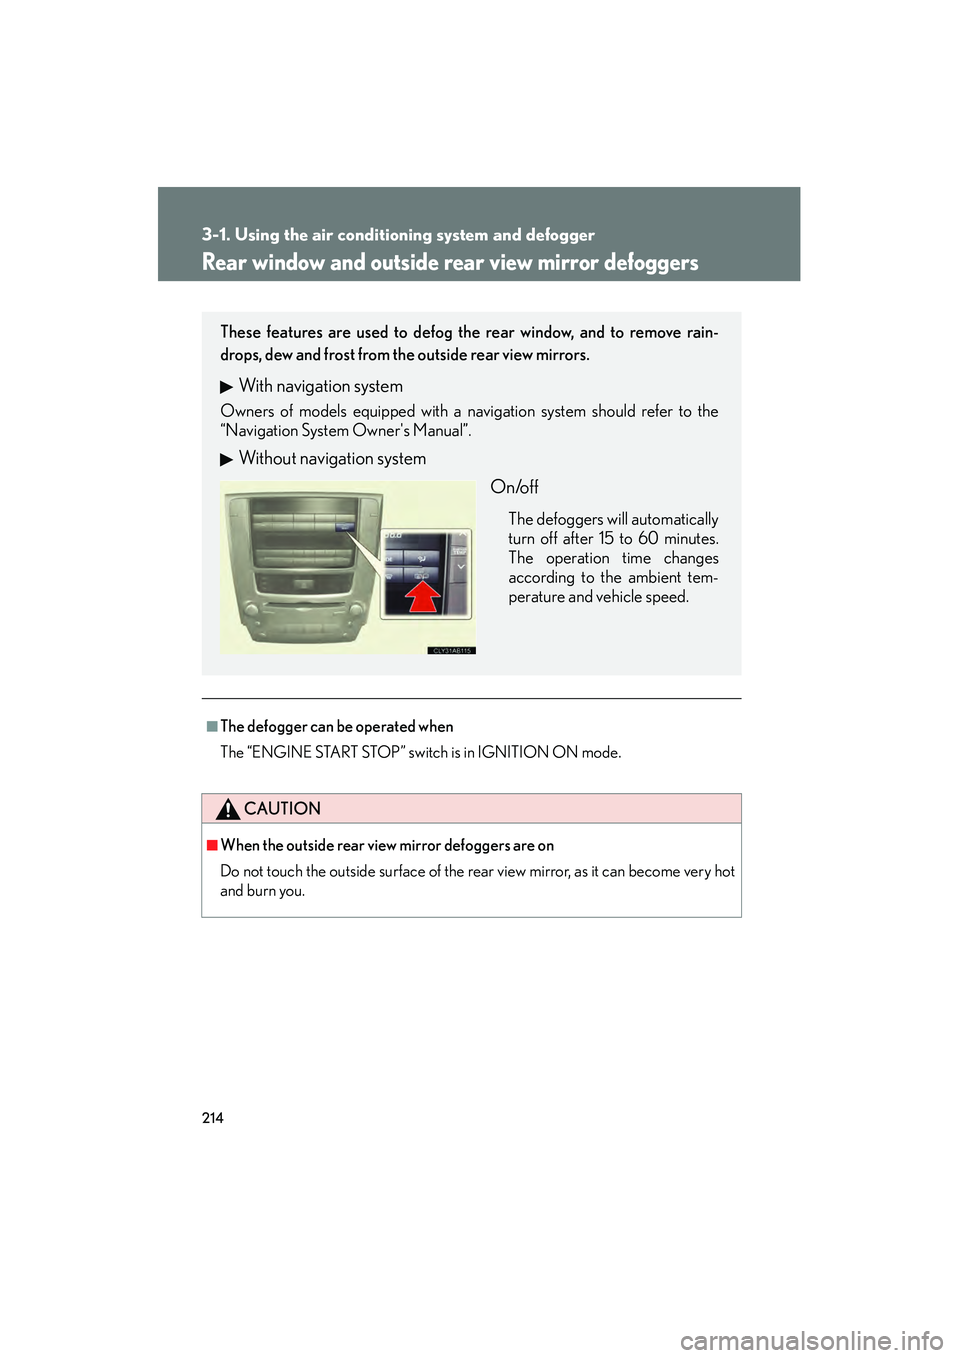 Lexus IS250 2011  Owners Manual 214
3-1. Using the air conditioning system and defogger
IS350/250_U
Rear window and outside rear view mirror defoggers
■The defogger can be operated when
The “ENGINE START STOP” switch is in IGN